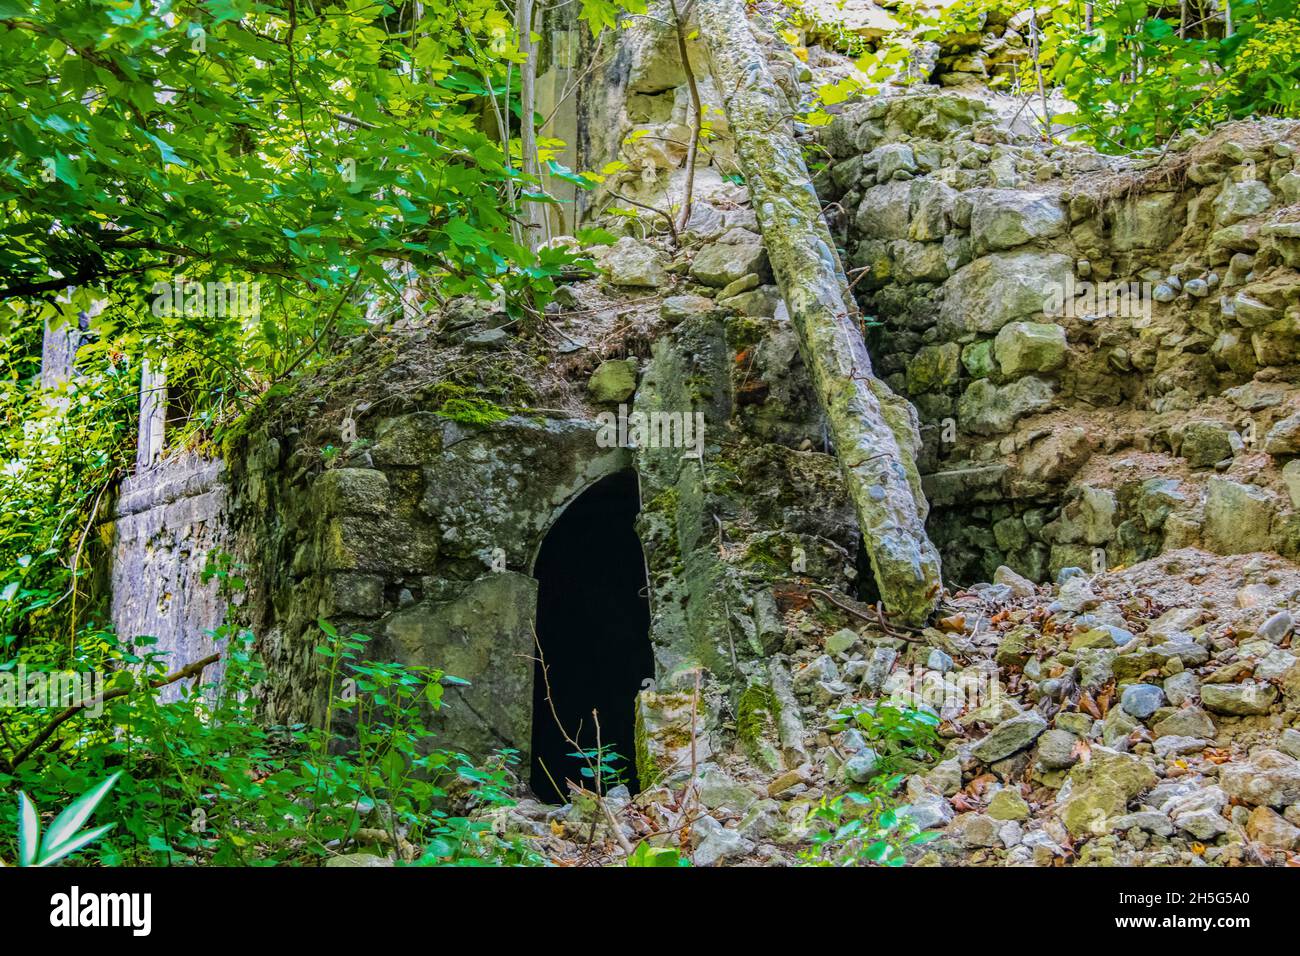 Collapsed rock and concrete bridge with arched opening underneath partly covered and tumbled rocks and debrie and overgrown vegetation Stock Photo